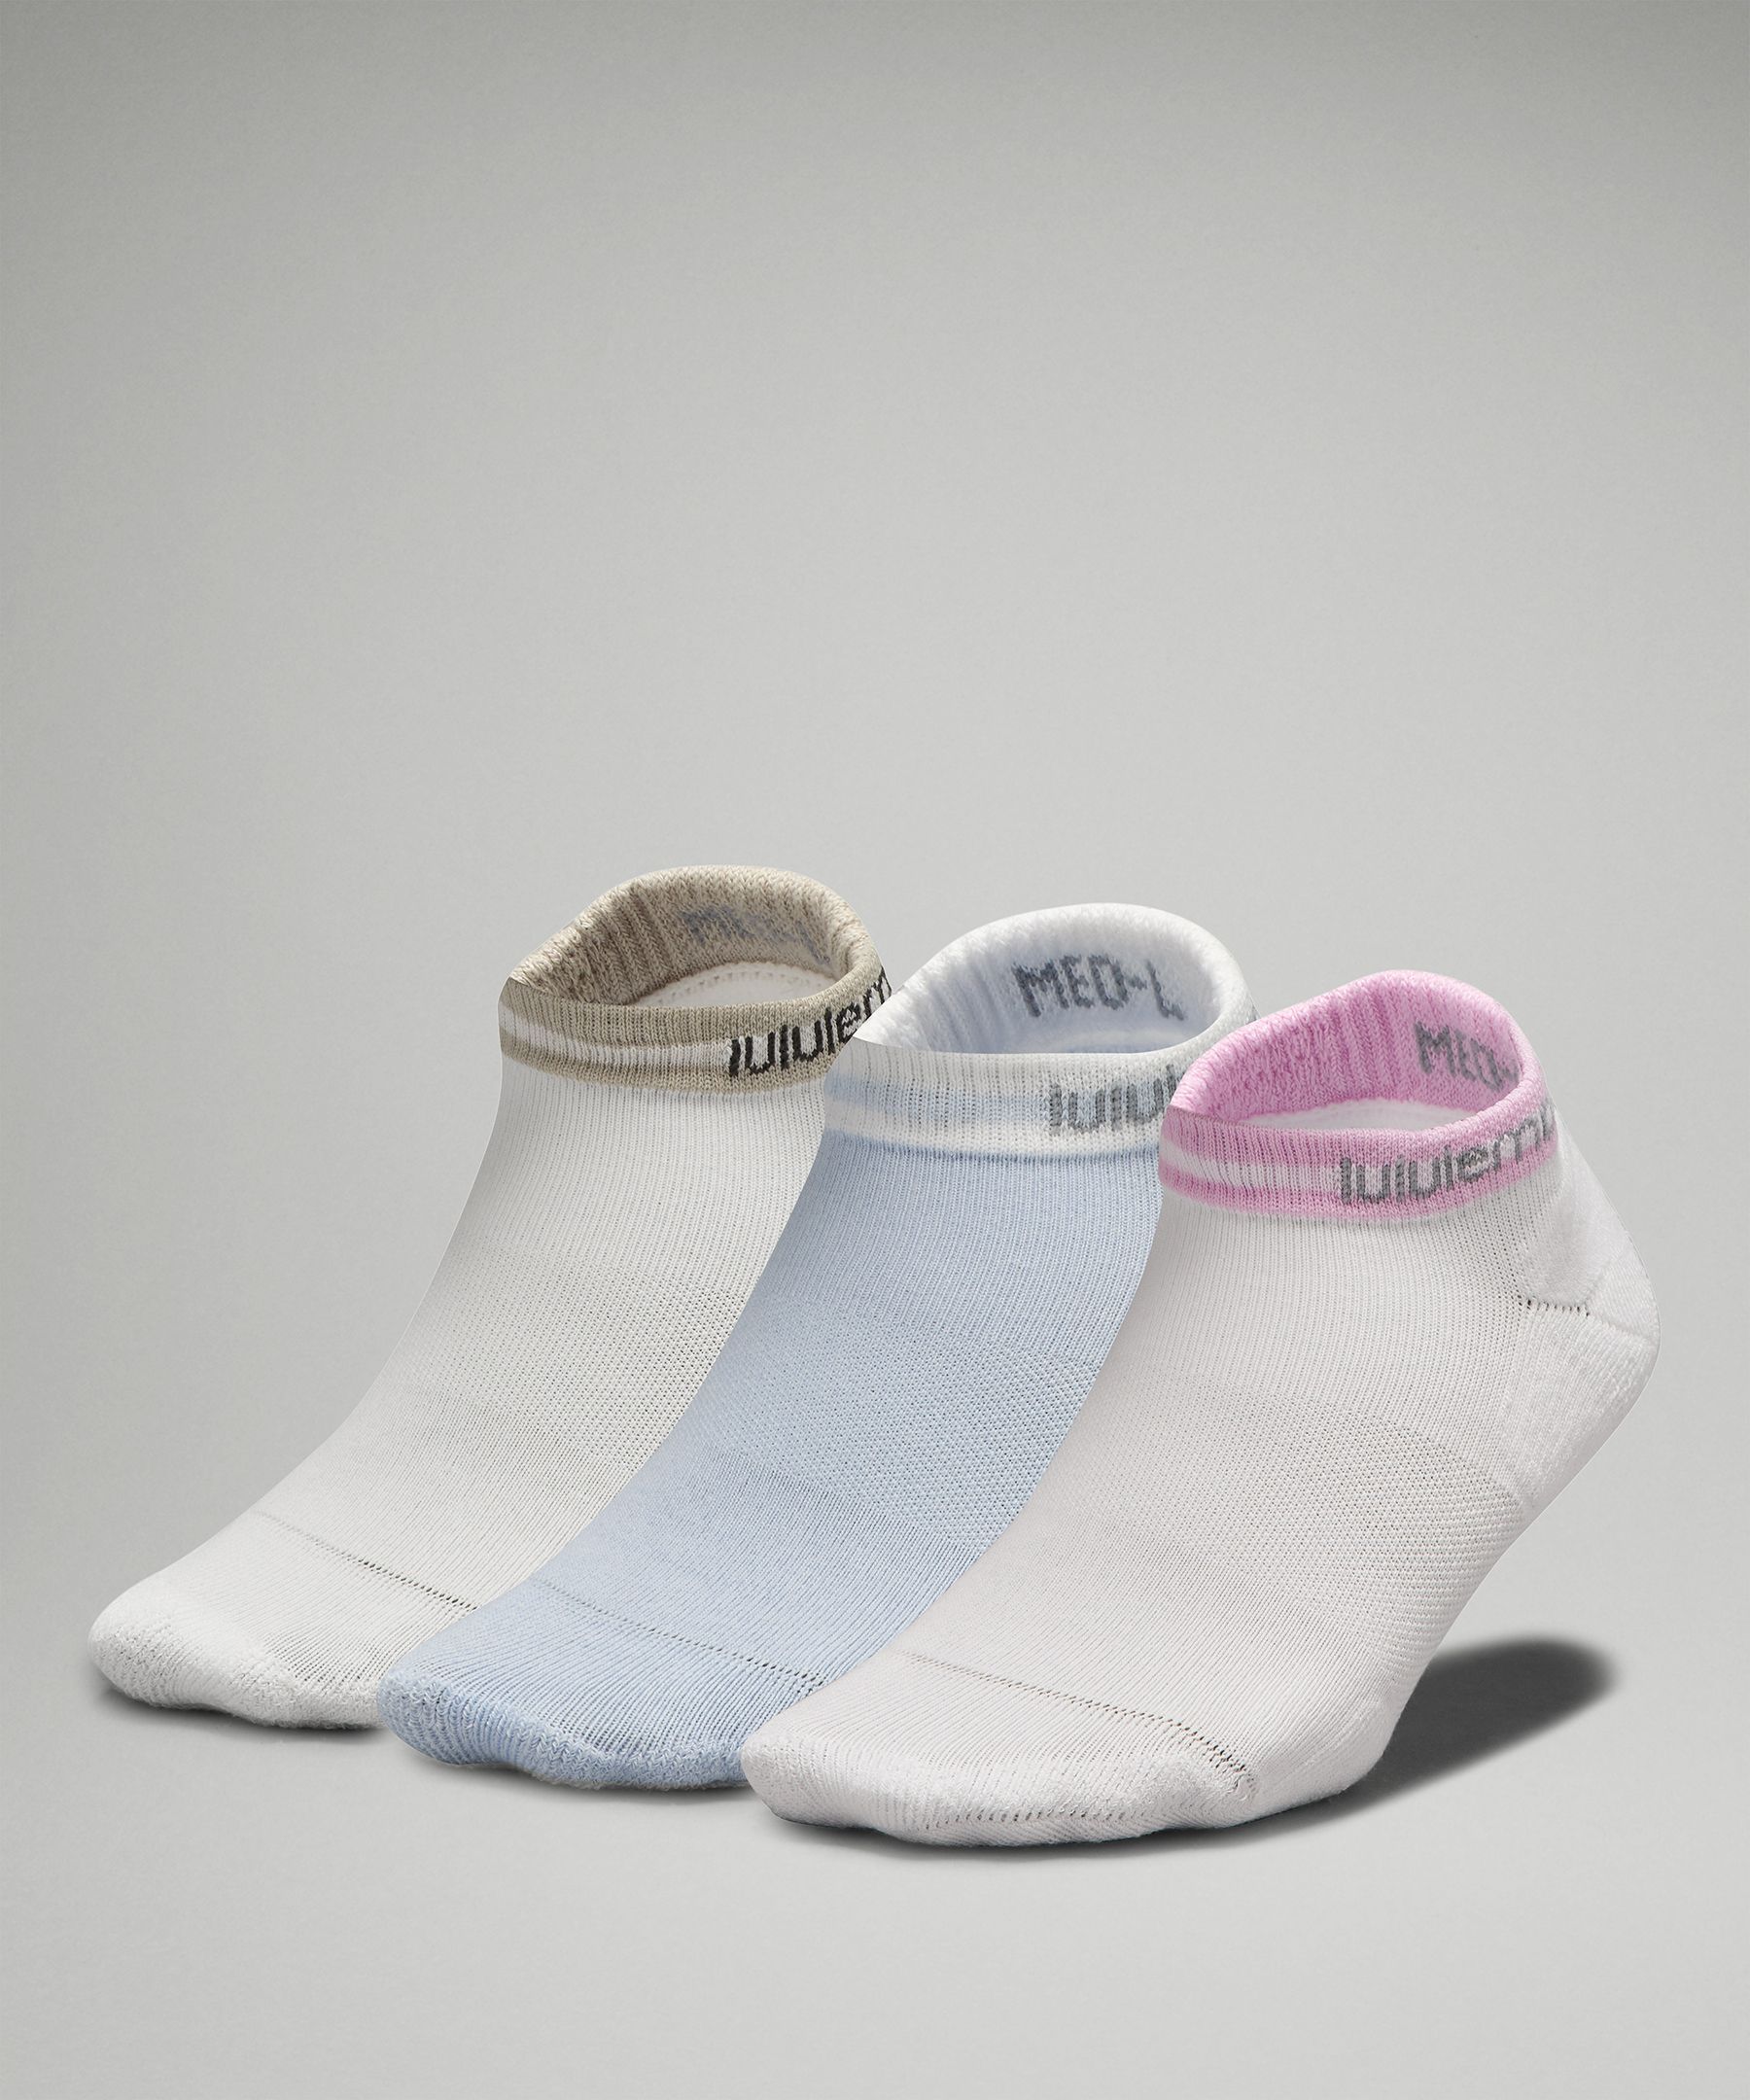 Womens Daily Stride Comfort Low-Ankle Socks Stripe *3 Pack